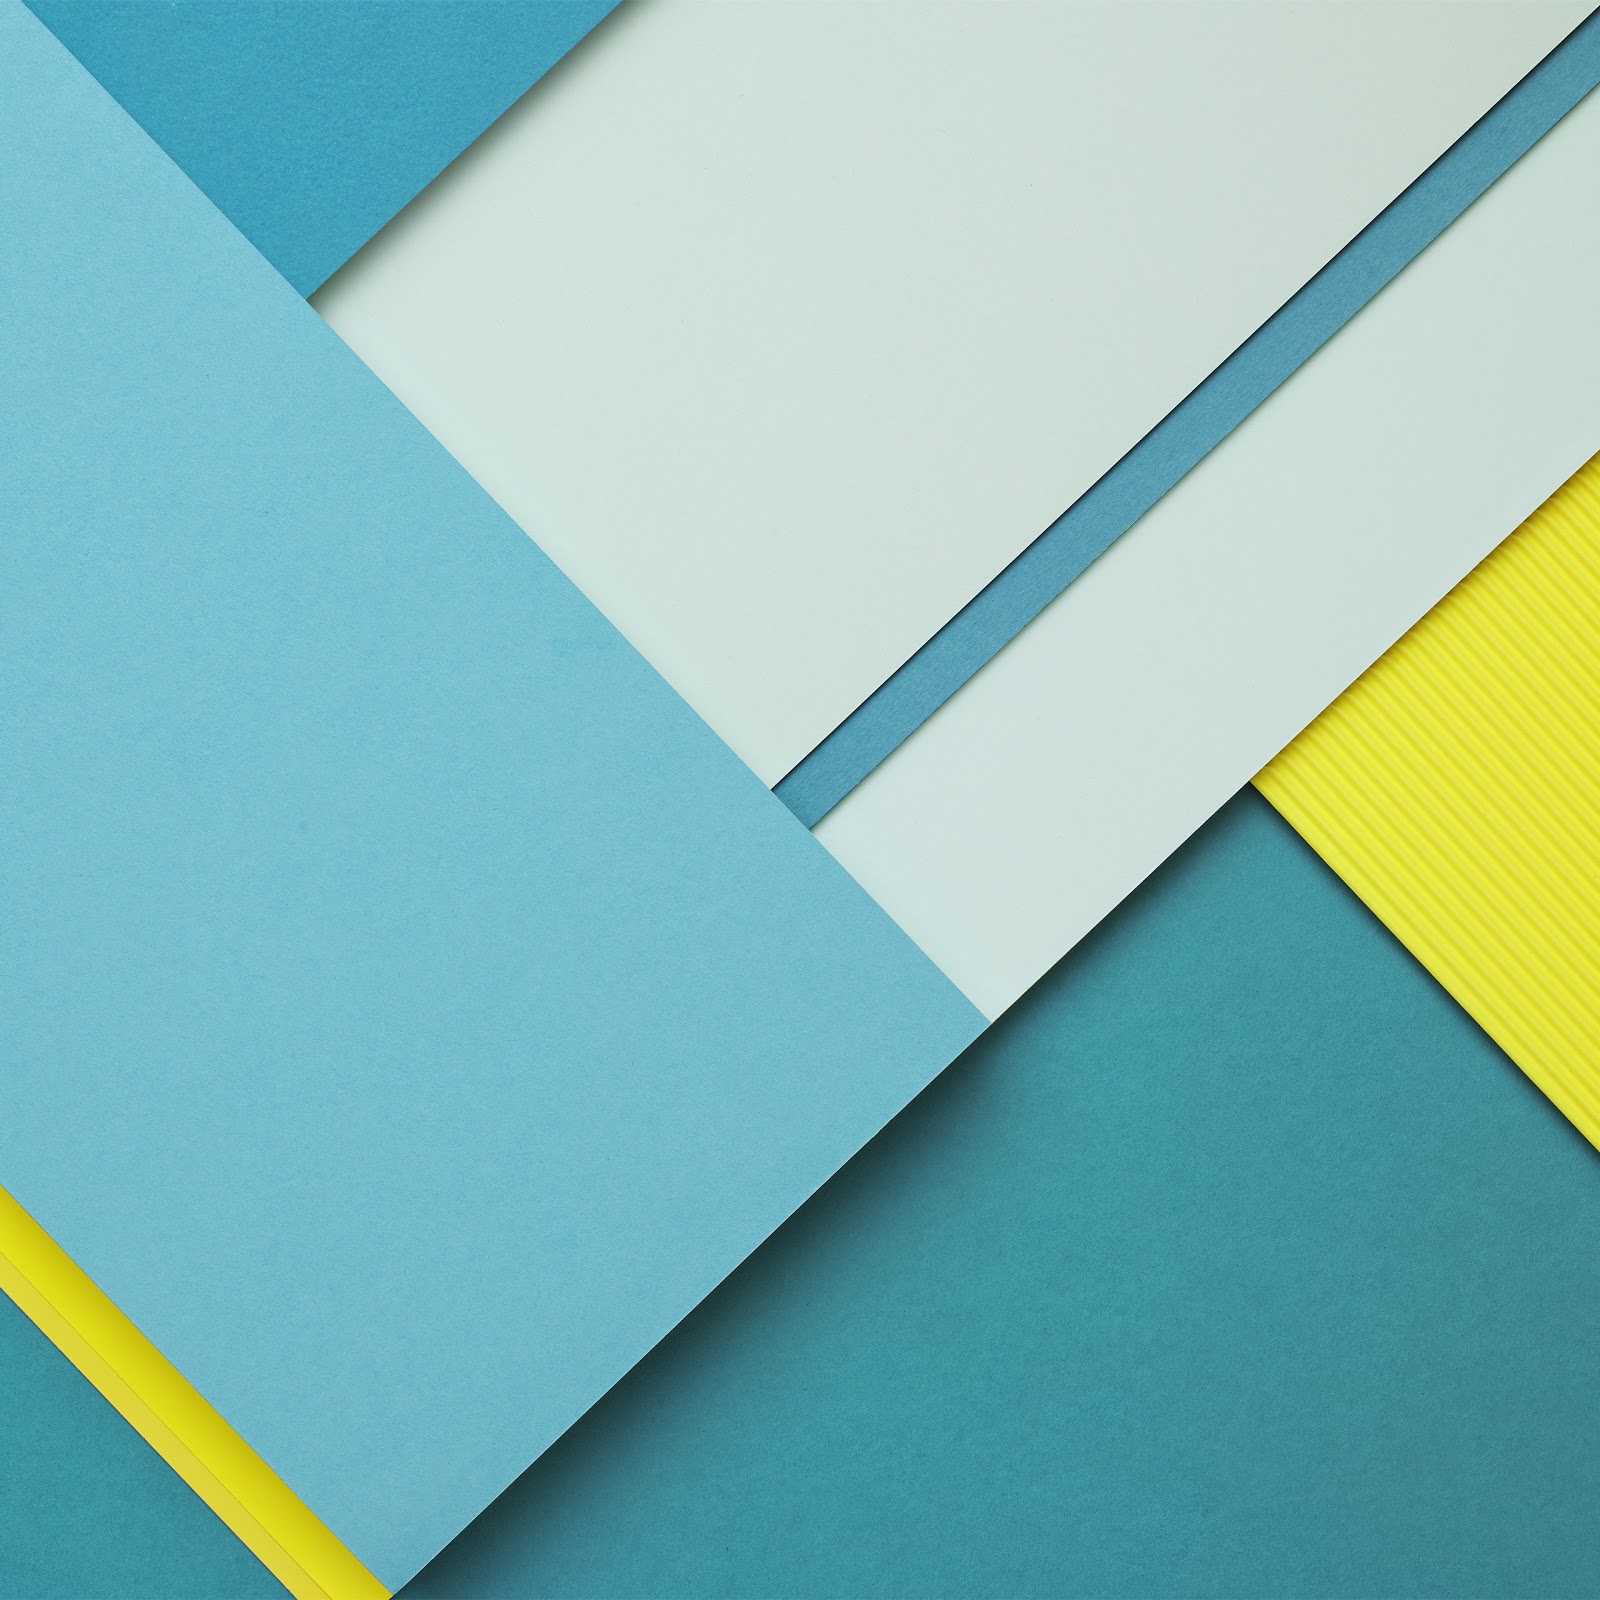 This Is The Official Android Lollipop Wallpaper From Google Now